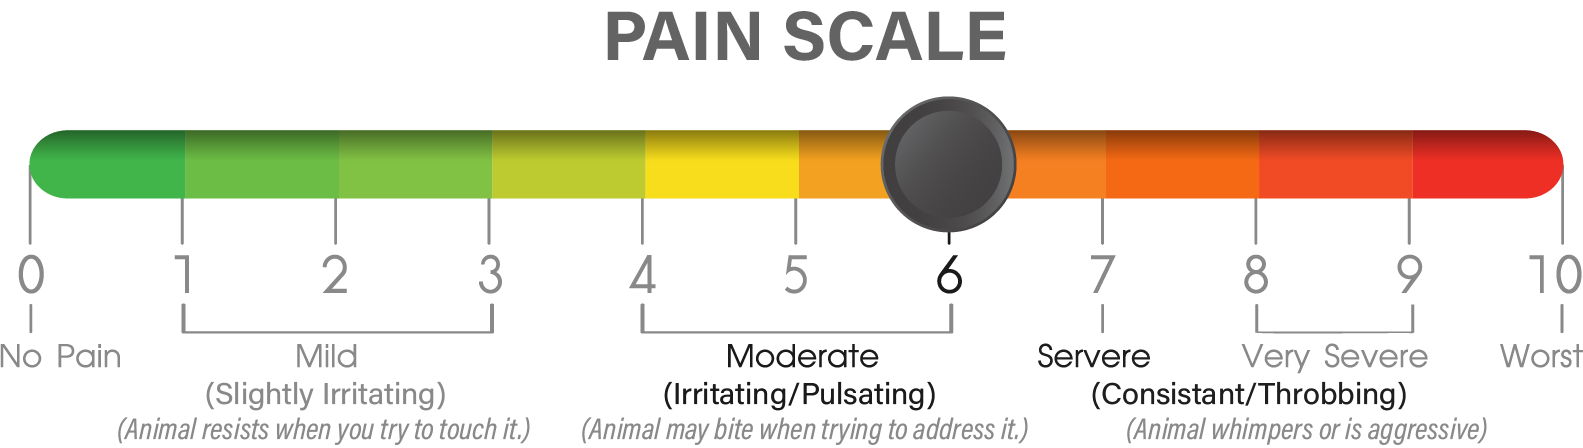 pain scale for pet bladder infection